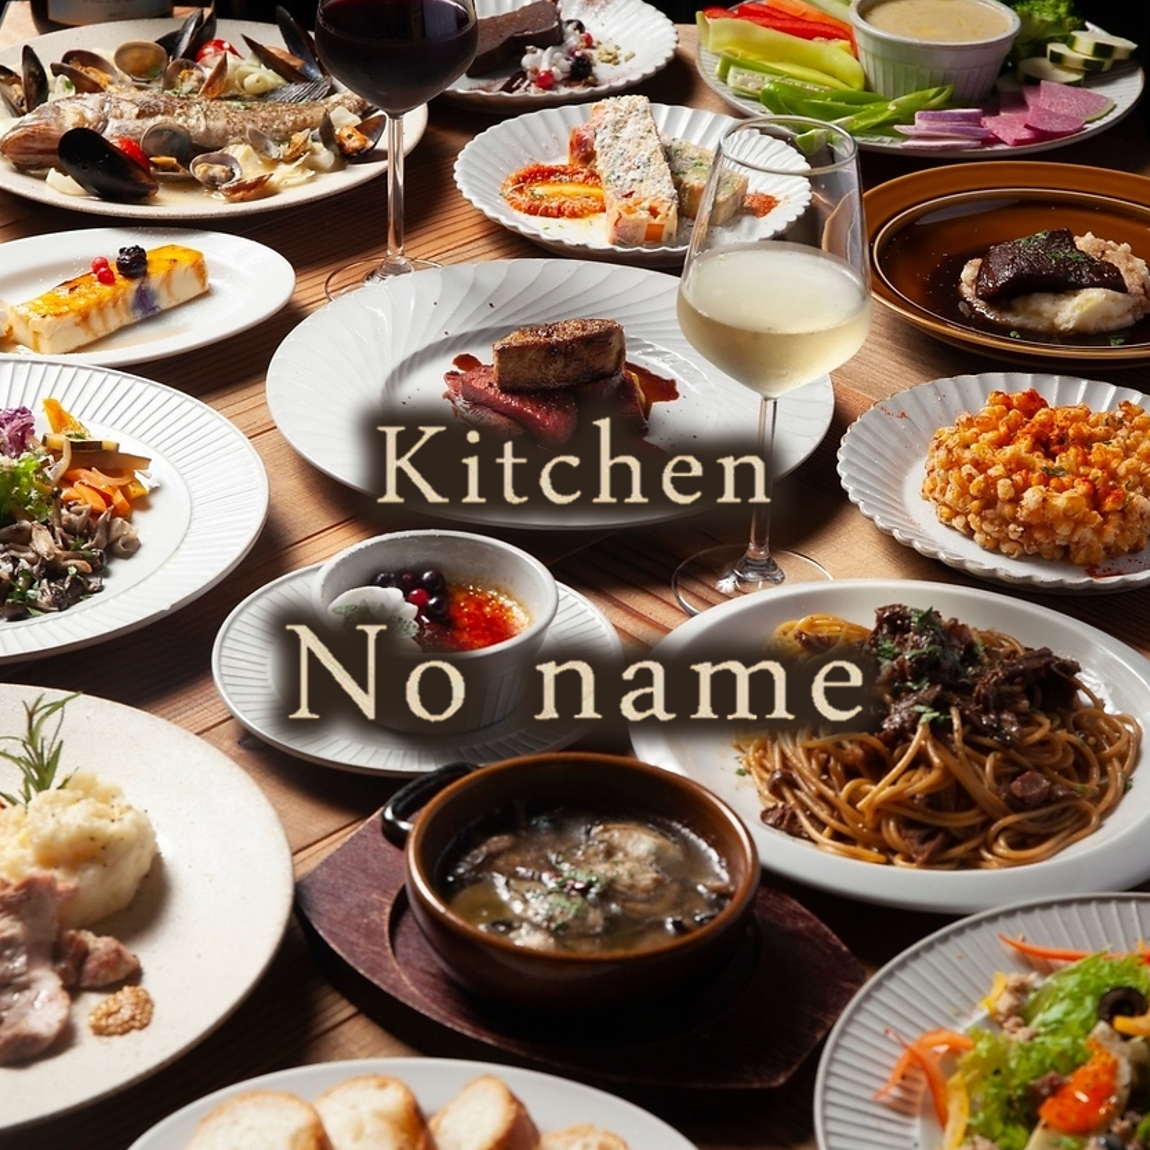 A Western restaurant with no name yet ◇ Italian food made with organic ingredients that will please your body and soul...